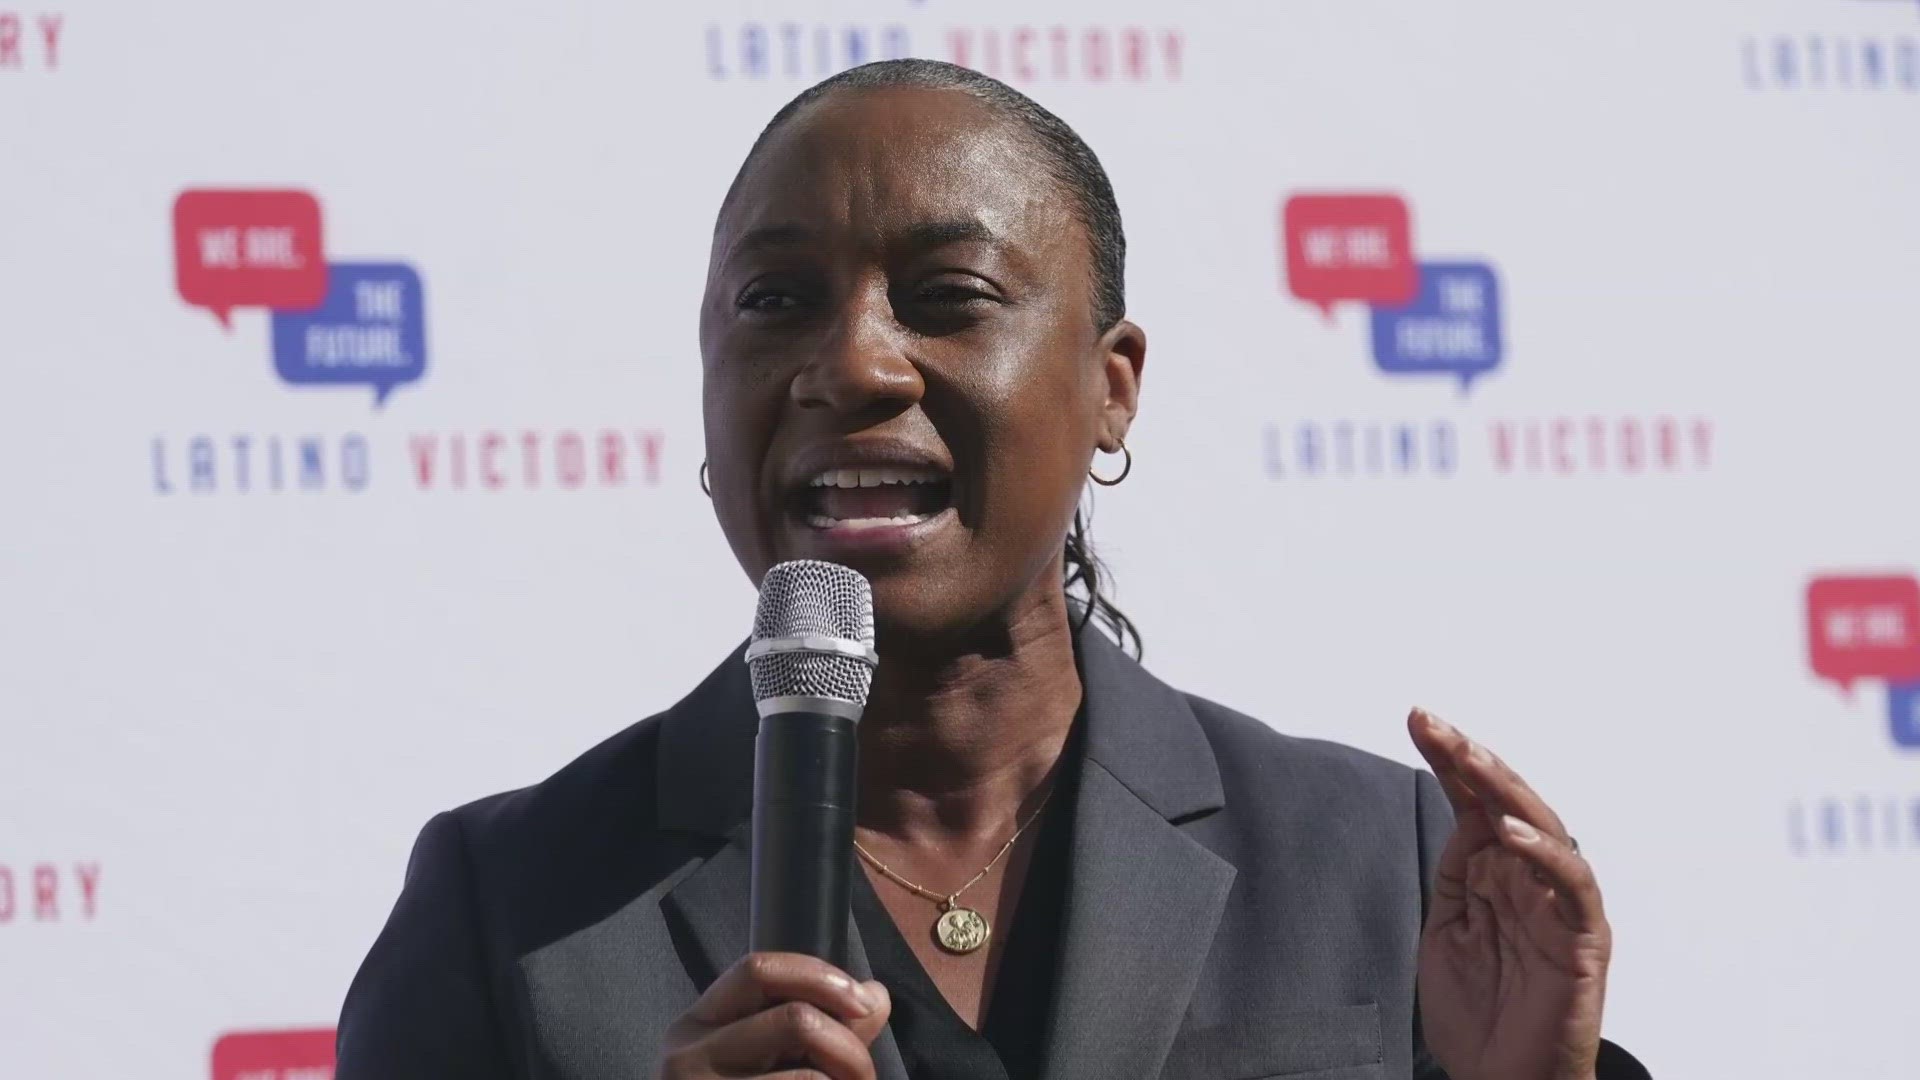 California Gov. Gavin Newsom will name Laphonza Butler to fill the vacant U.S. Senate seat held by the late Sen. Dianne Feinstein.